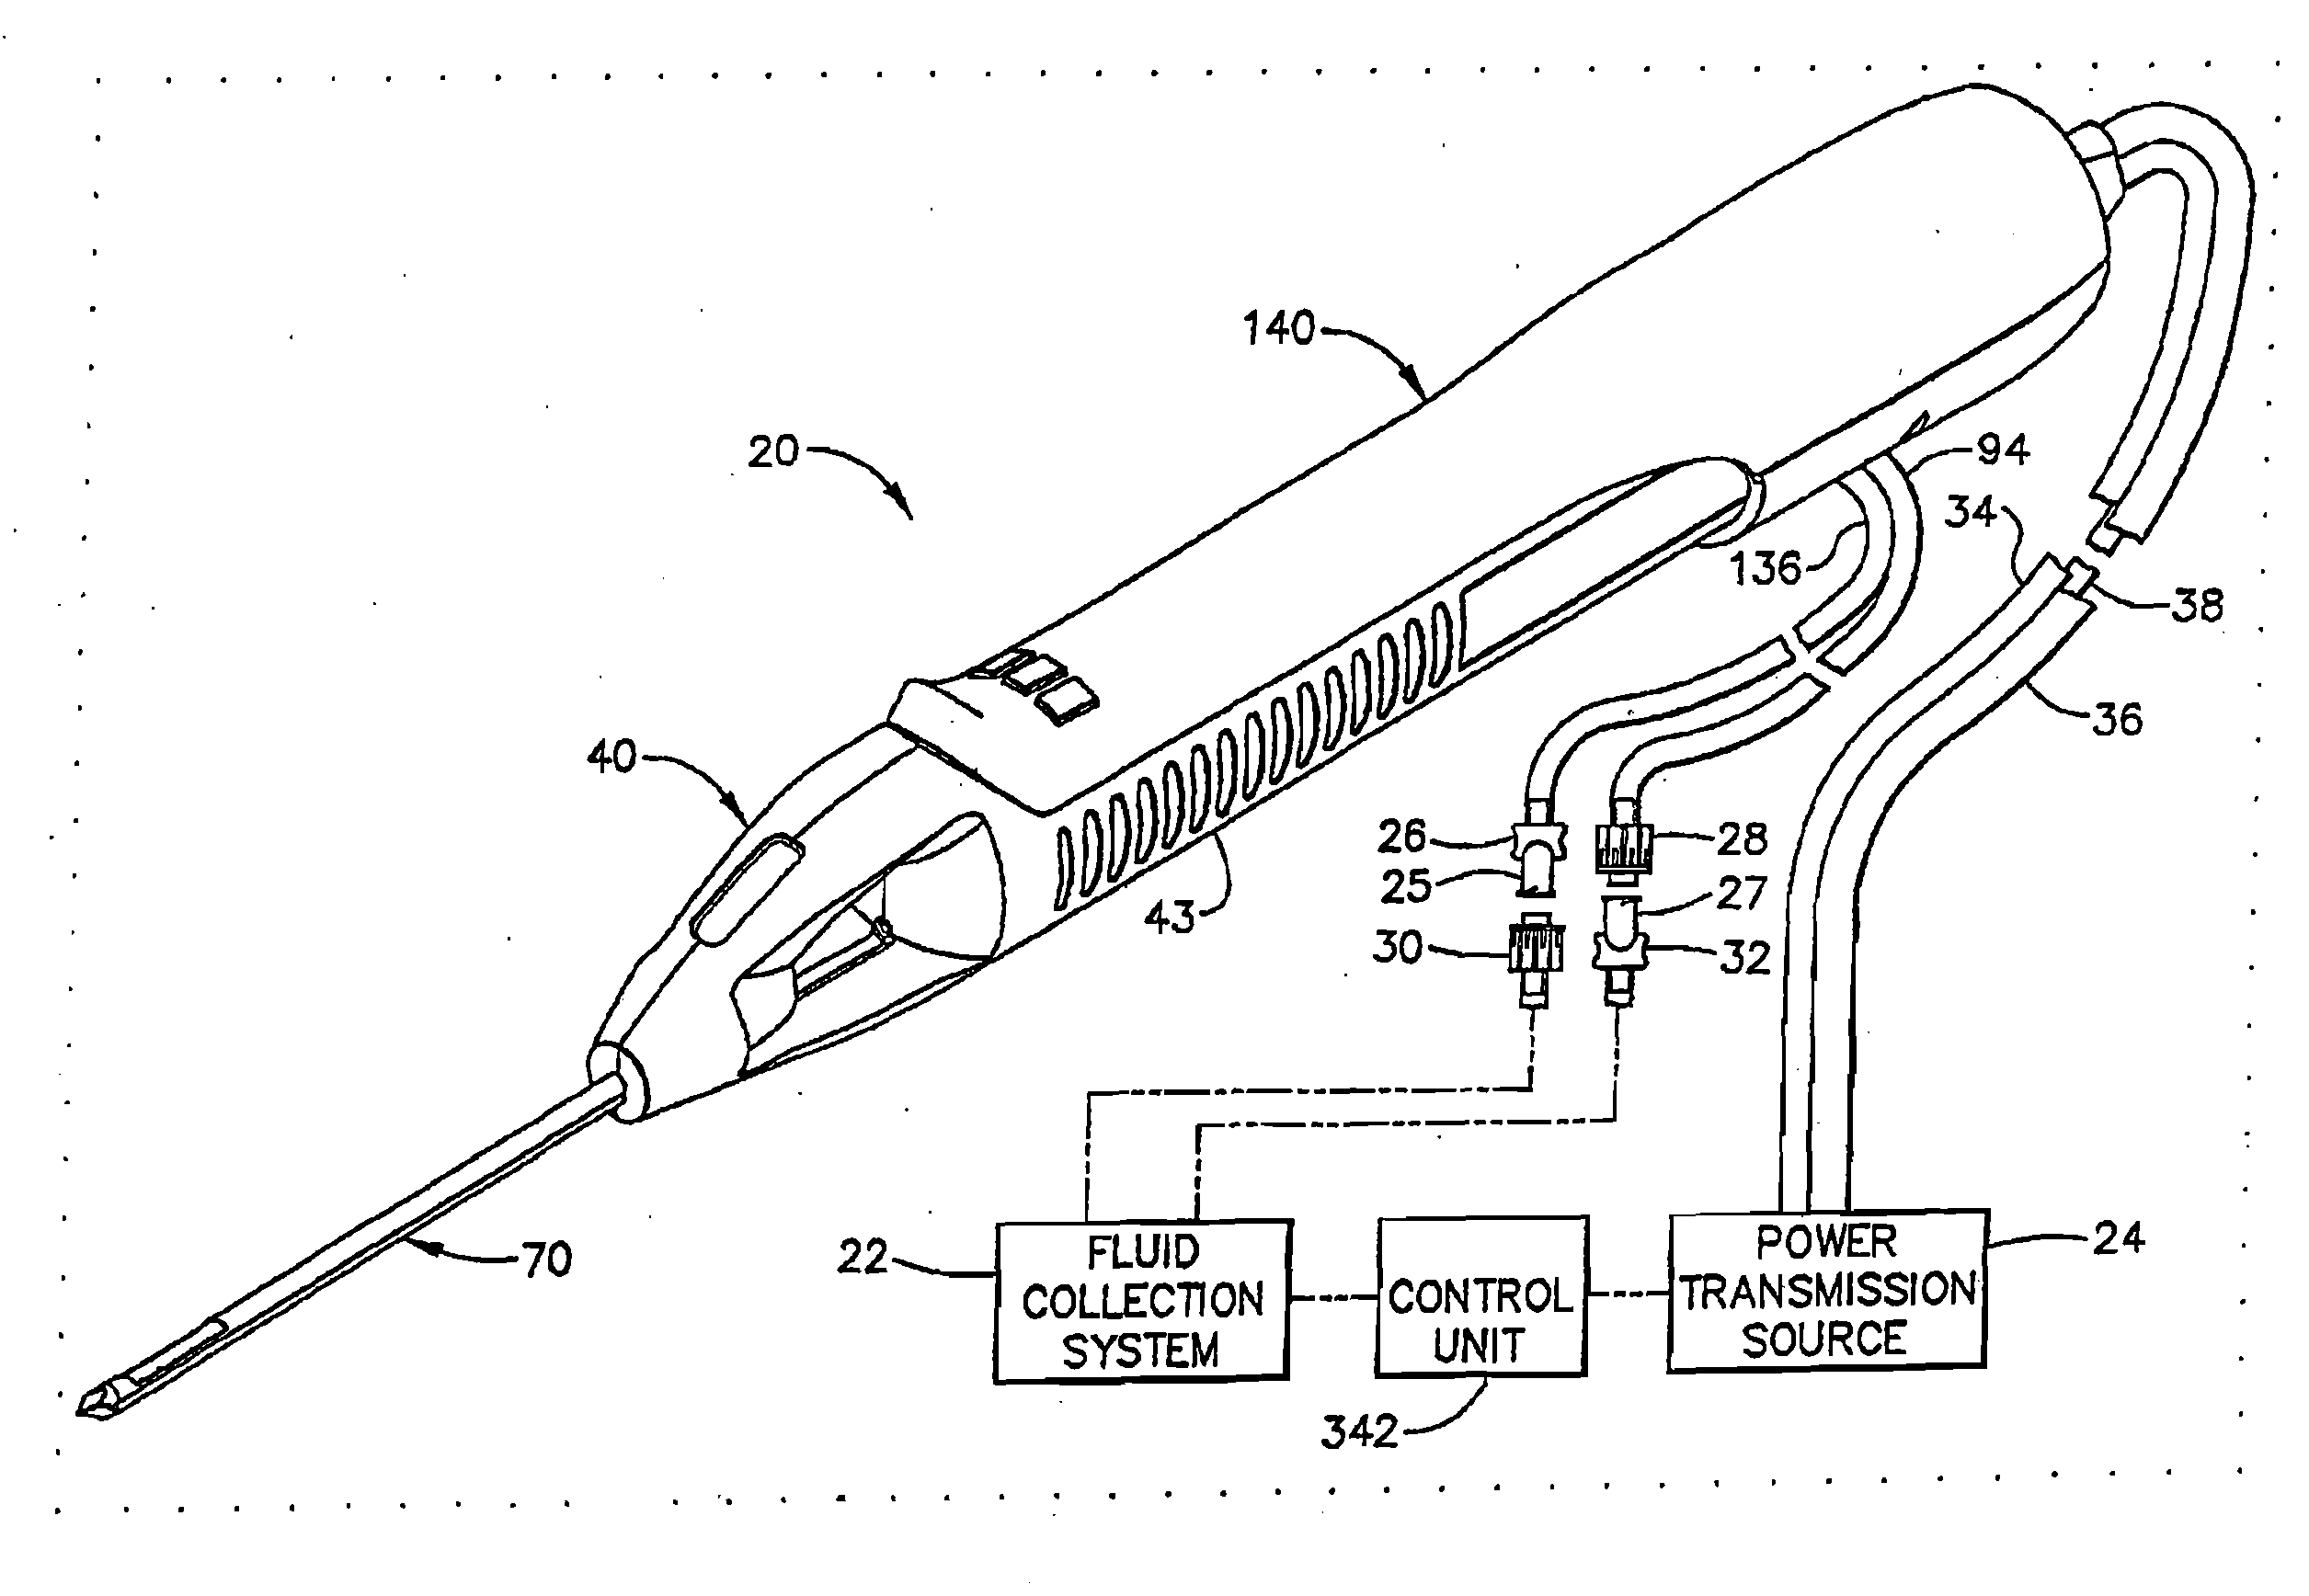 Surgical Device for The Collection of Soft Tissue